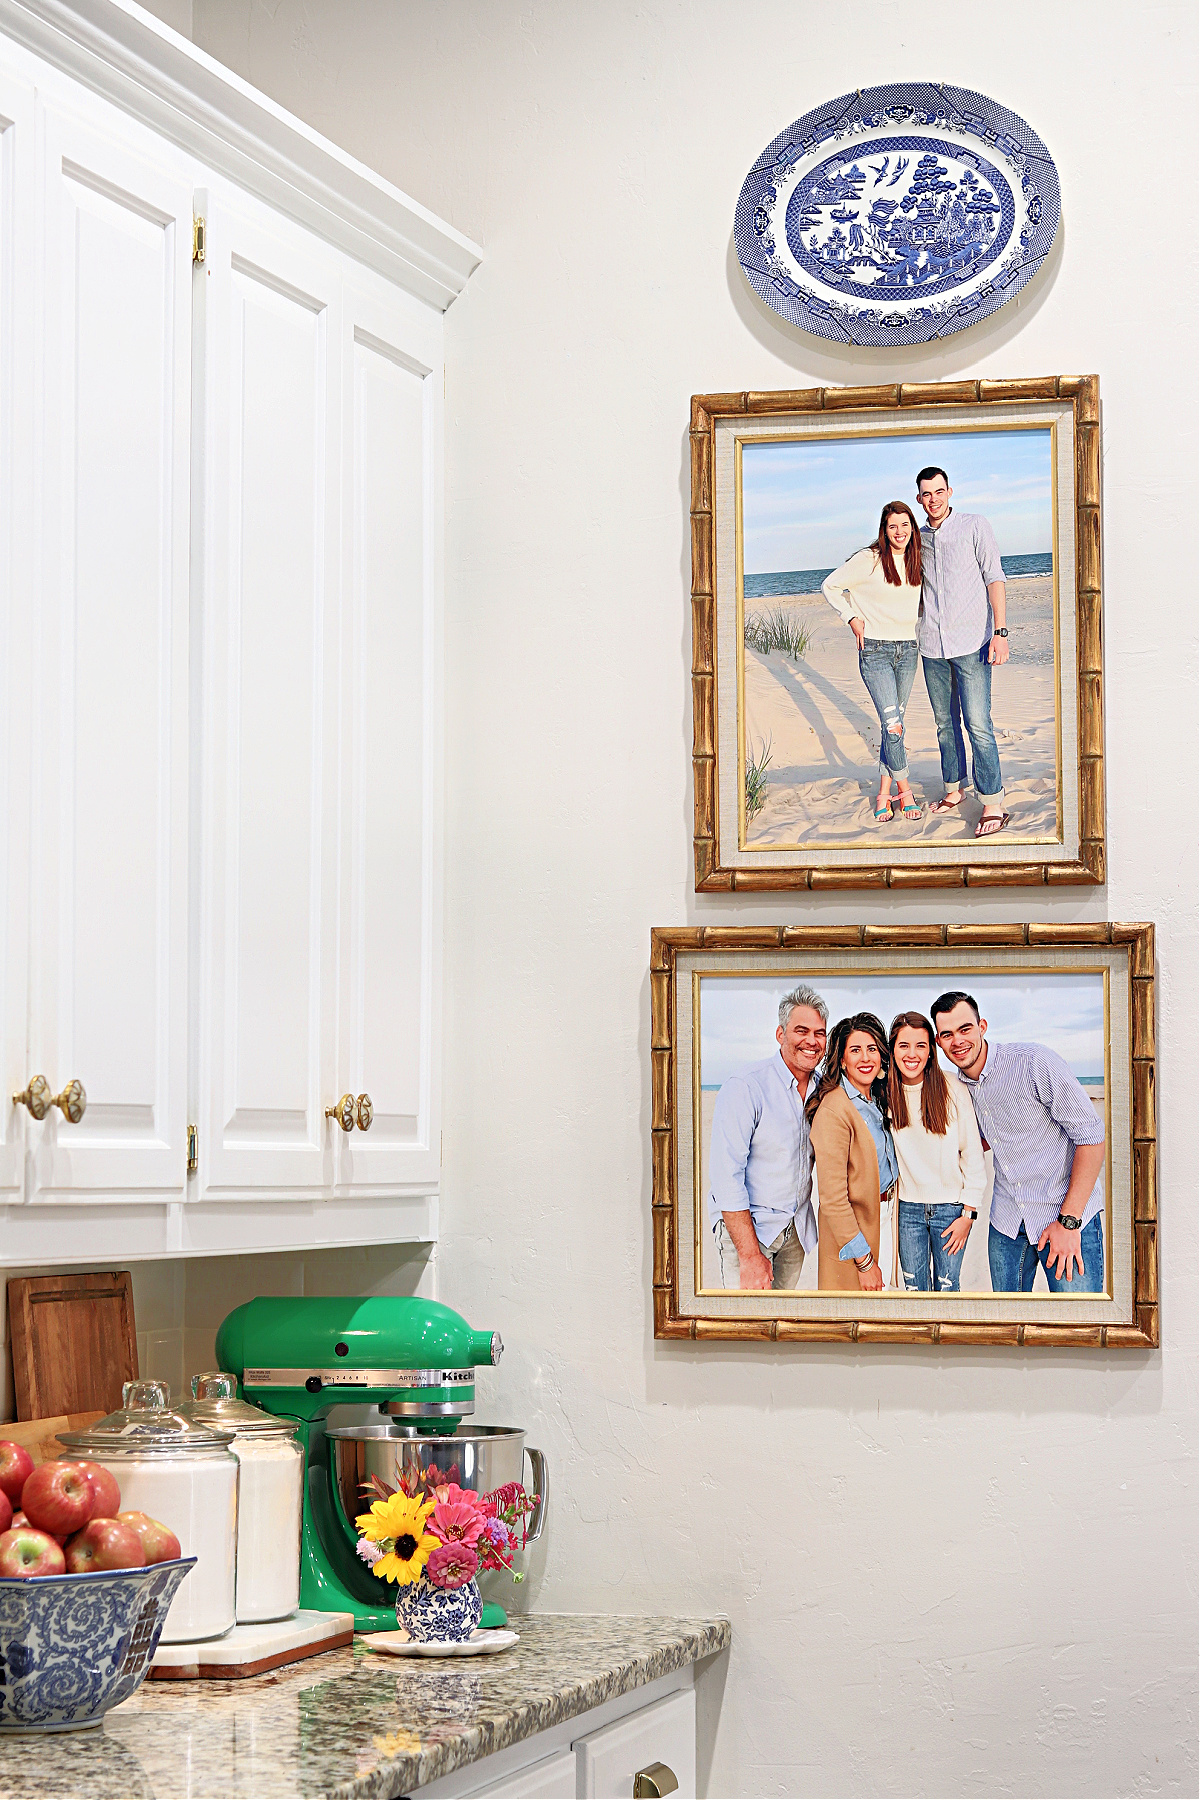 How to make a faux photo canvas with large photo prints